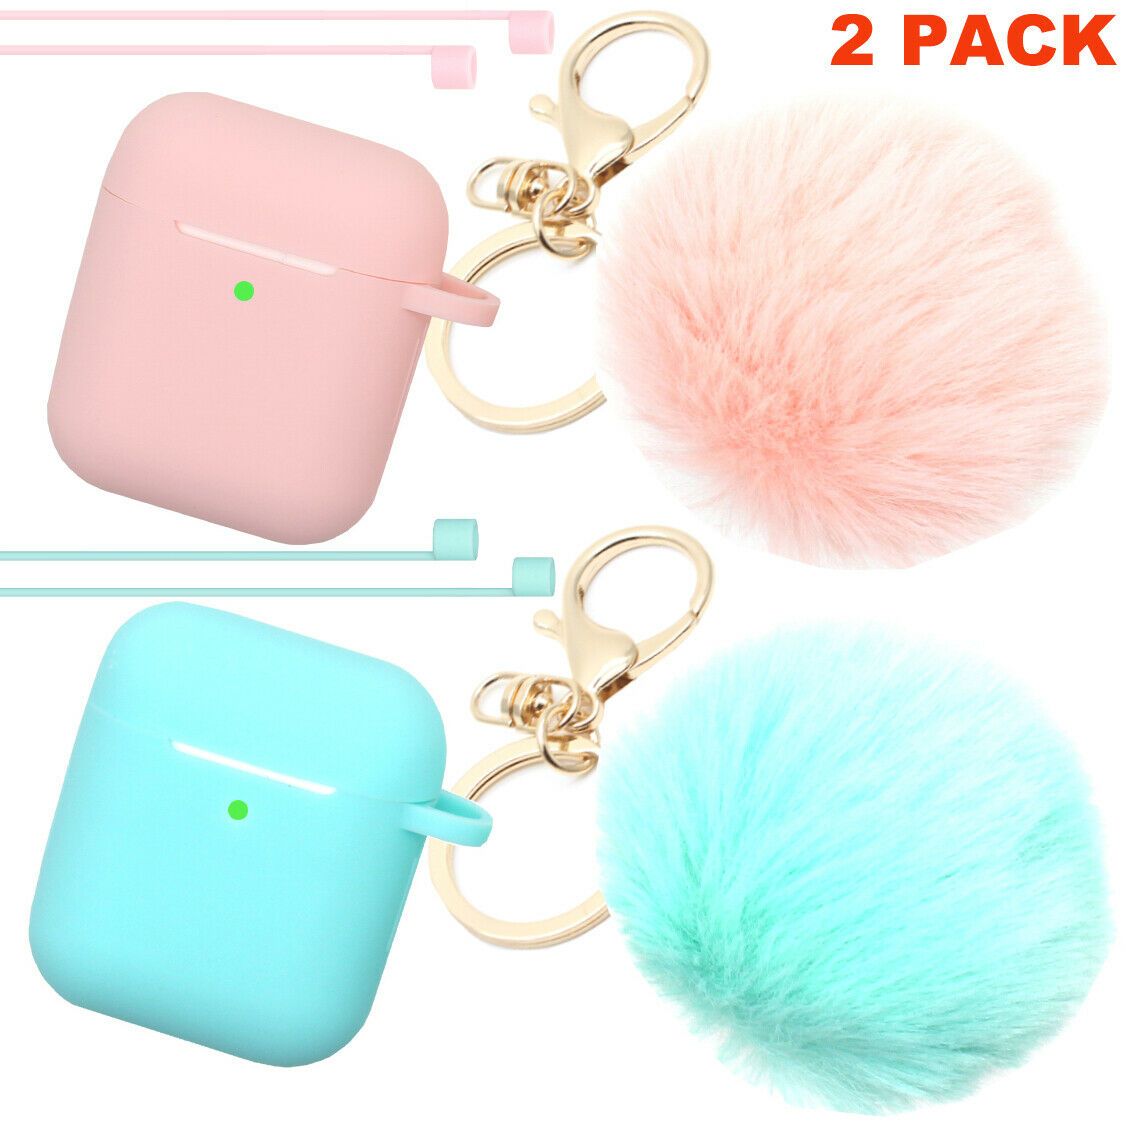 Cute Airpods Silicone Case Cover w/Fur Ball Keychain Strap for Apple Airpods 1/2 ervin.accessories Pink+Mint (2 Pack) 